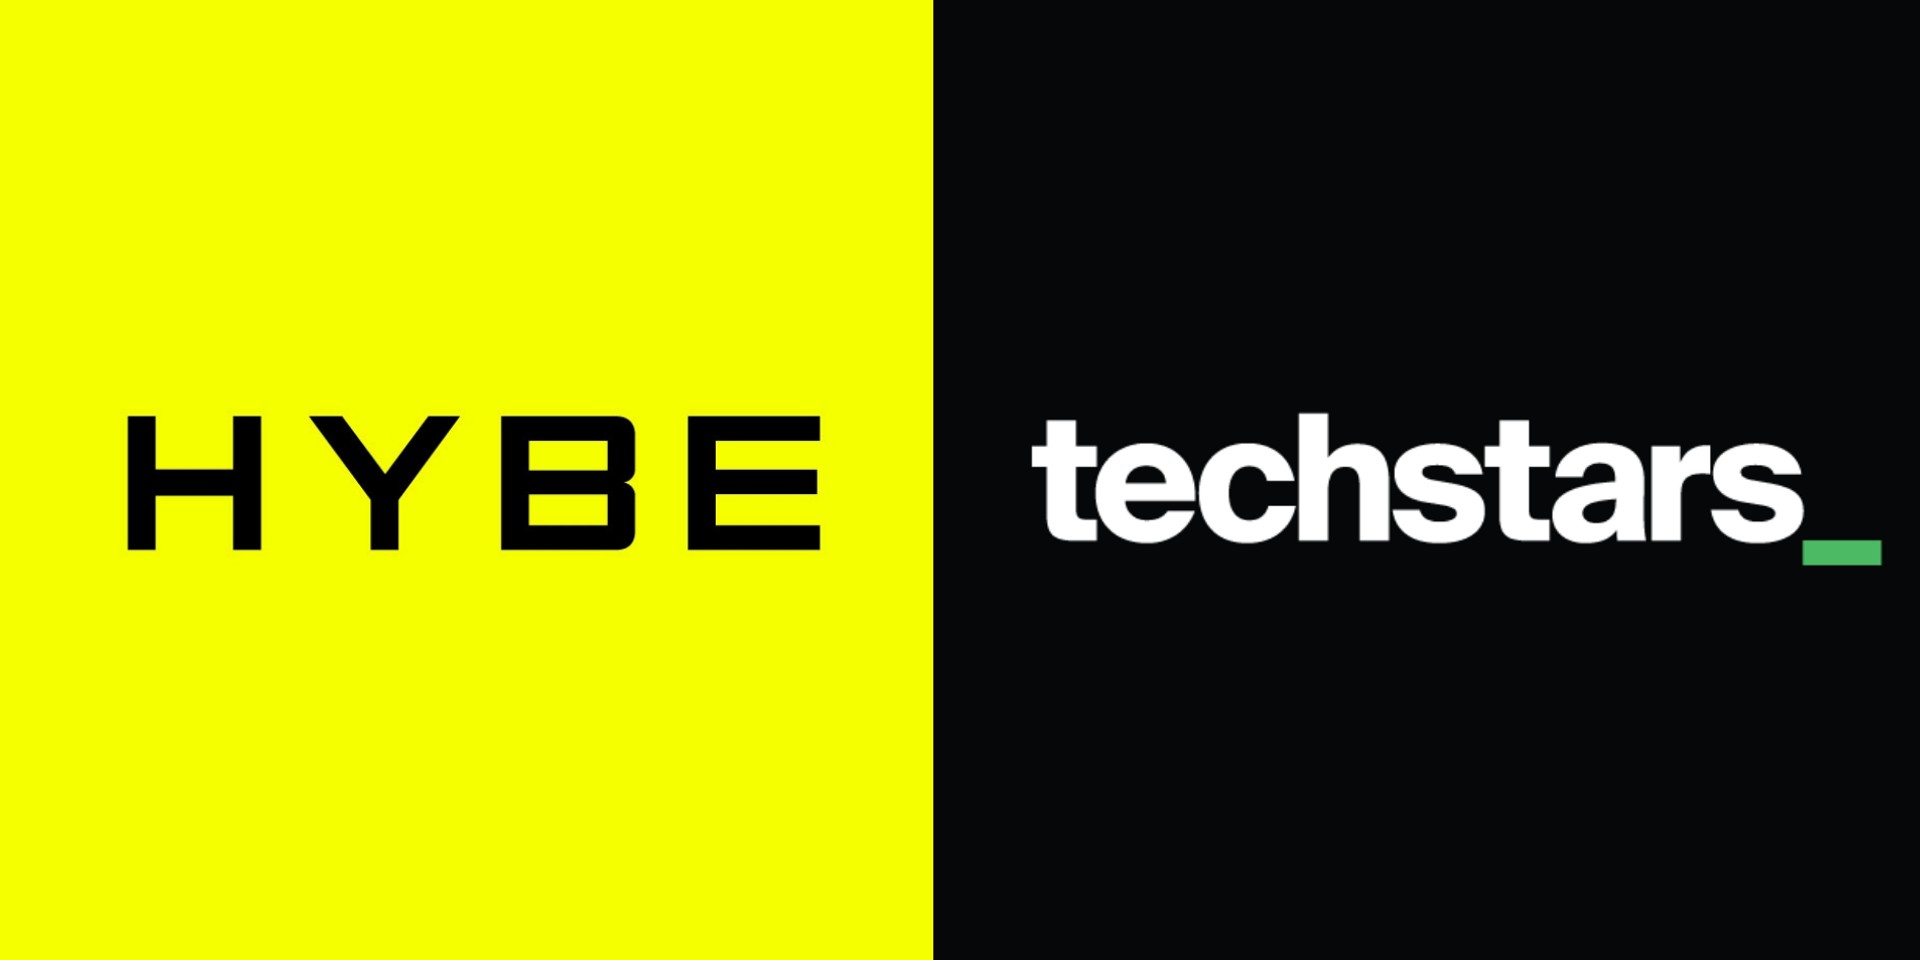 HYBE joins Avex, Amazon Music, Warner Music Group, and more in Techstars' music startup accelerator programme as an investor partner